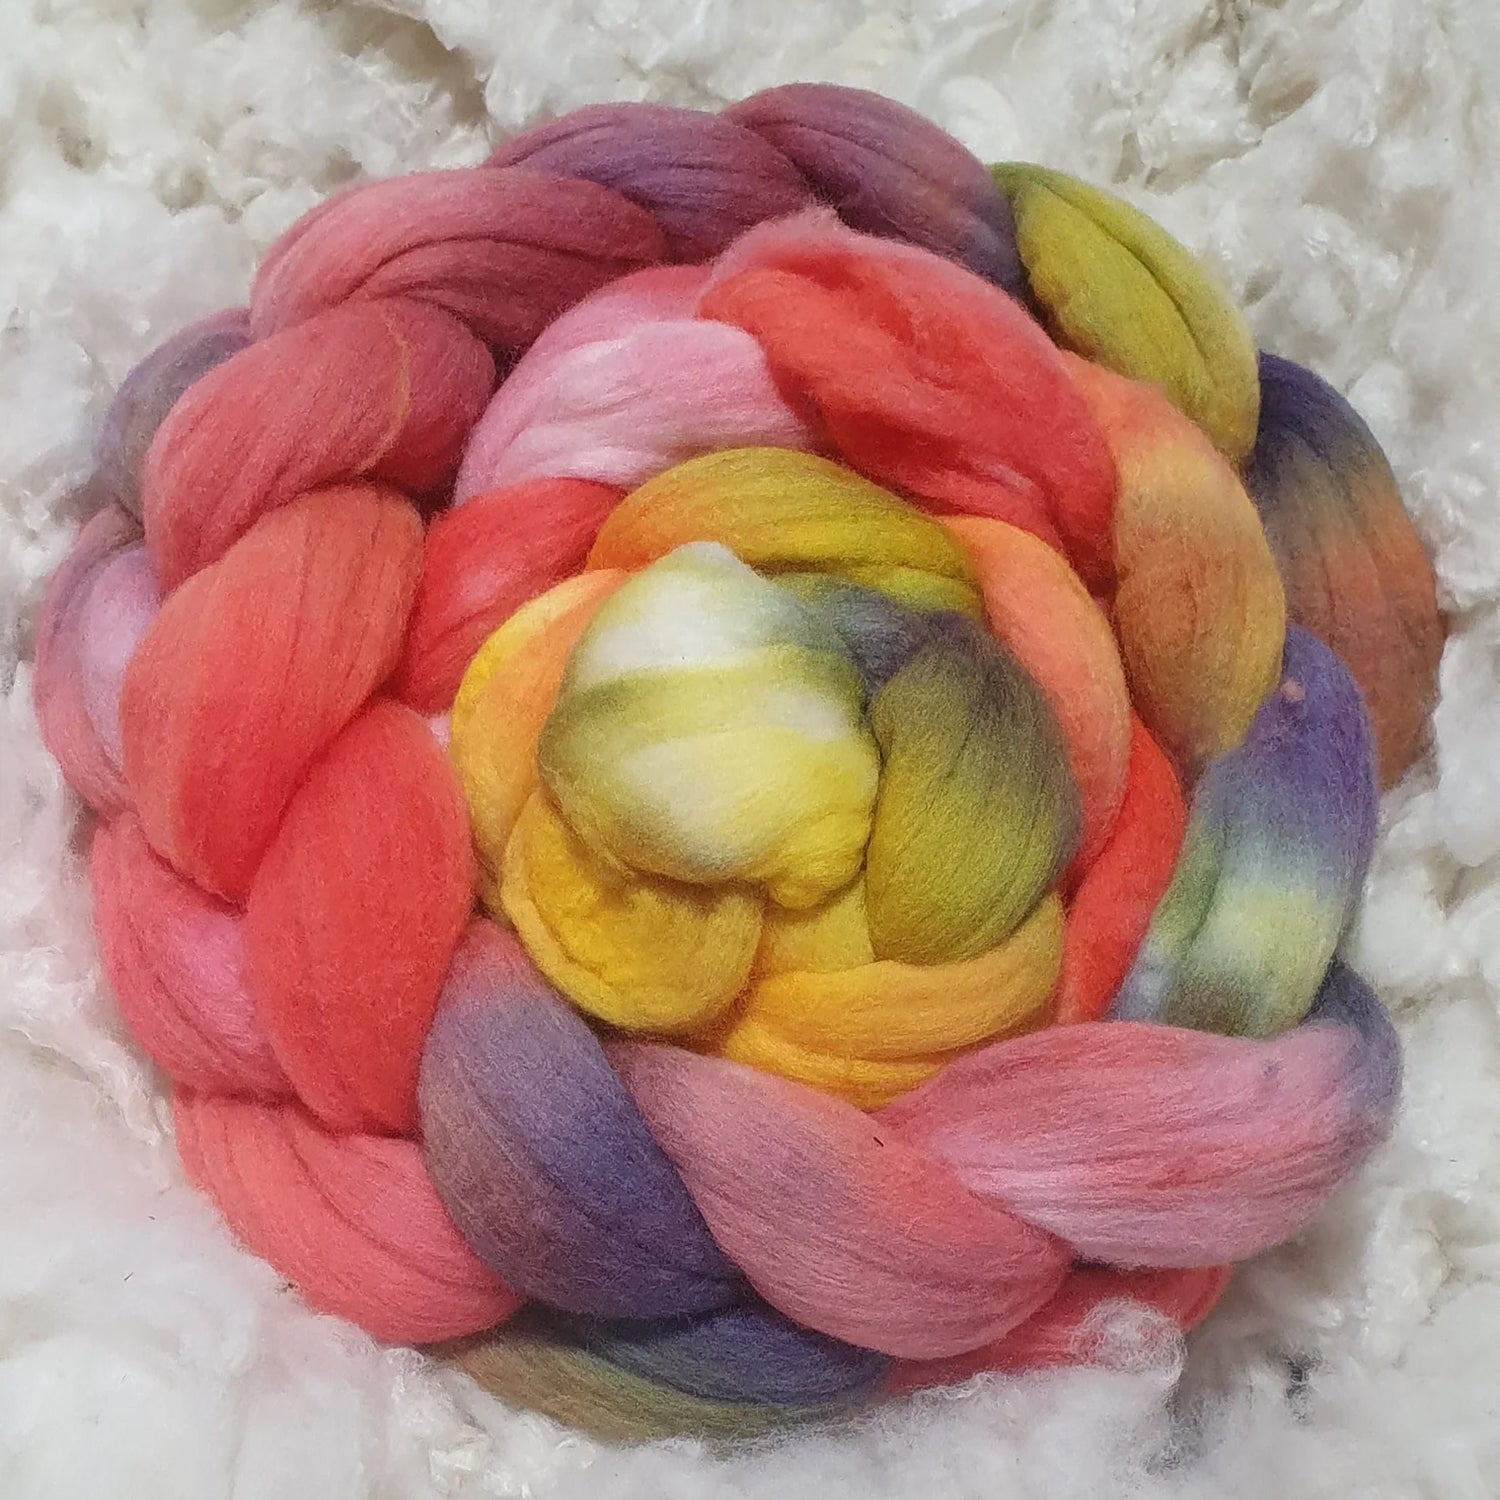 HAND DYED WOOL TOP / SLIVER / ROVING - 200GRAMS - COTTAGE GARDEN